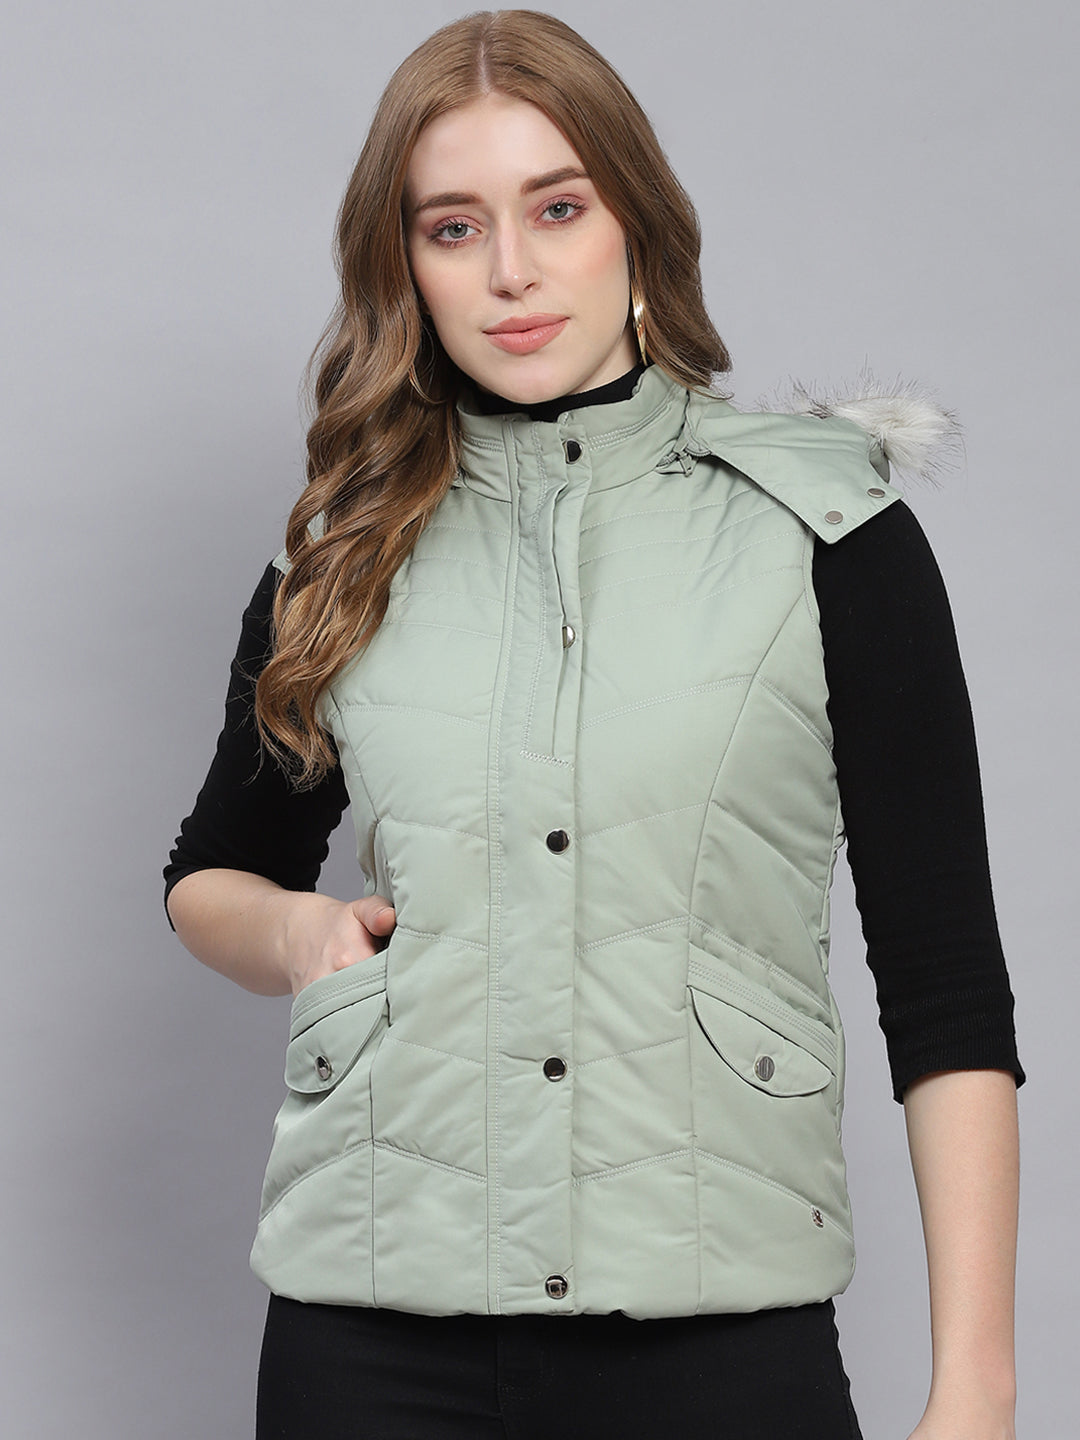 himachali half jacket for women Free shipping COD available